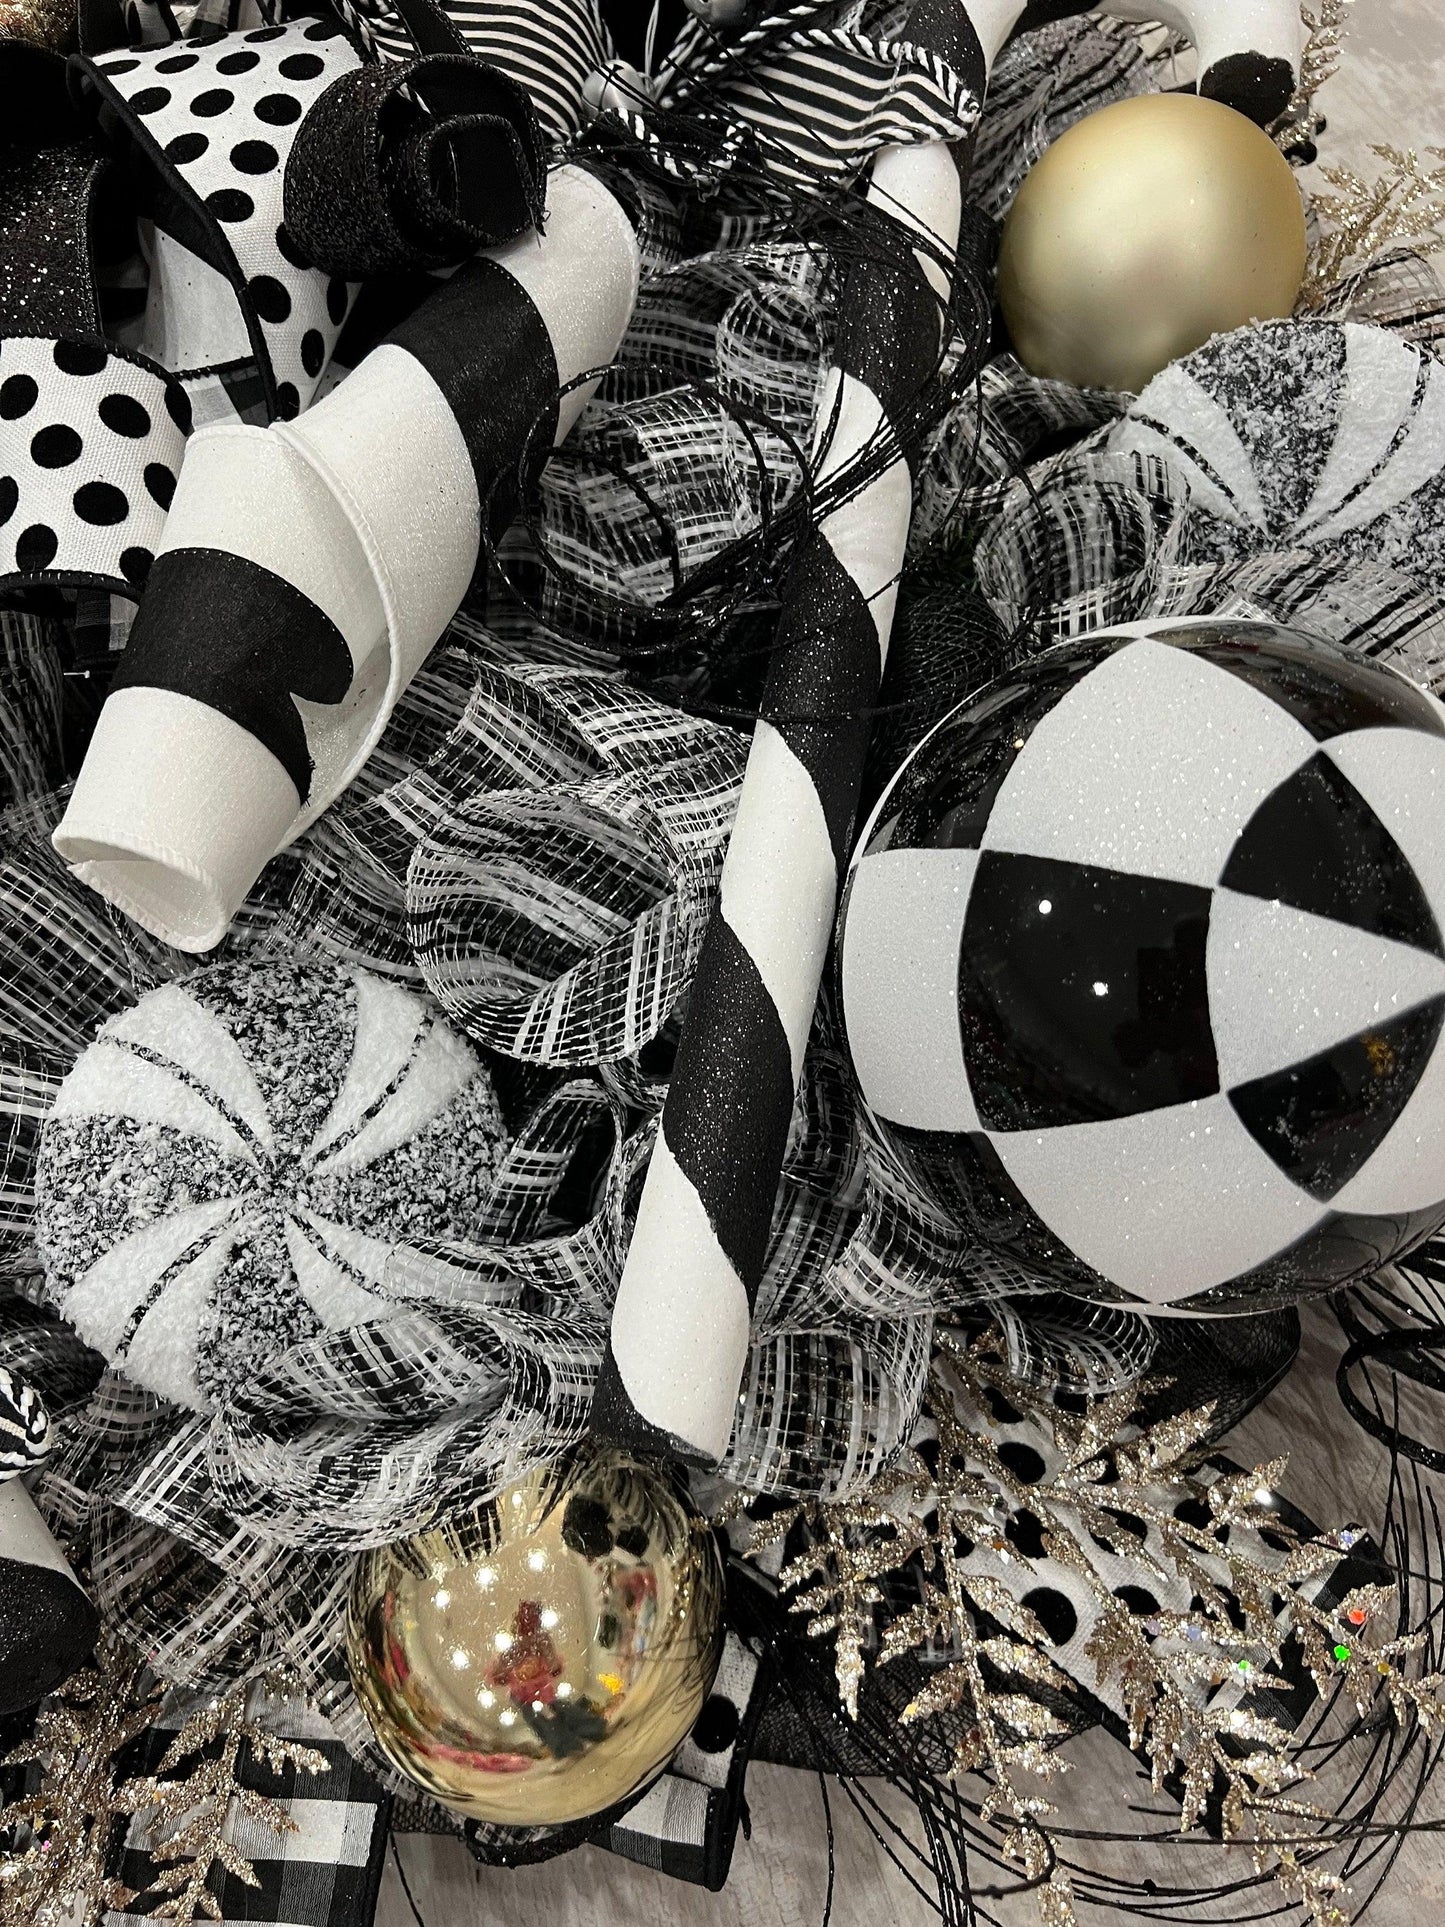 Black and White Decor Wreath - Burlap and Bling Decor